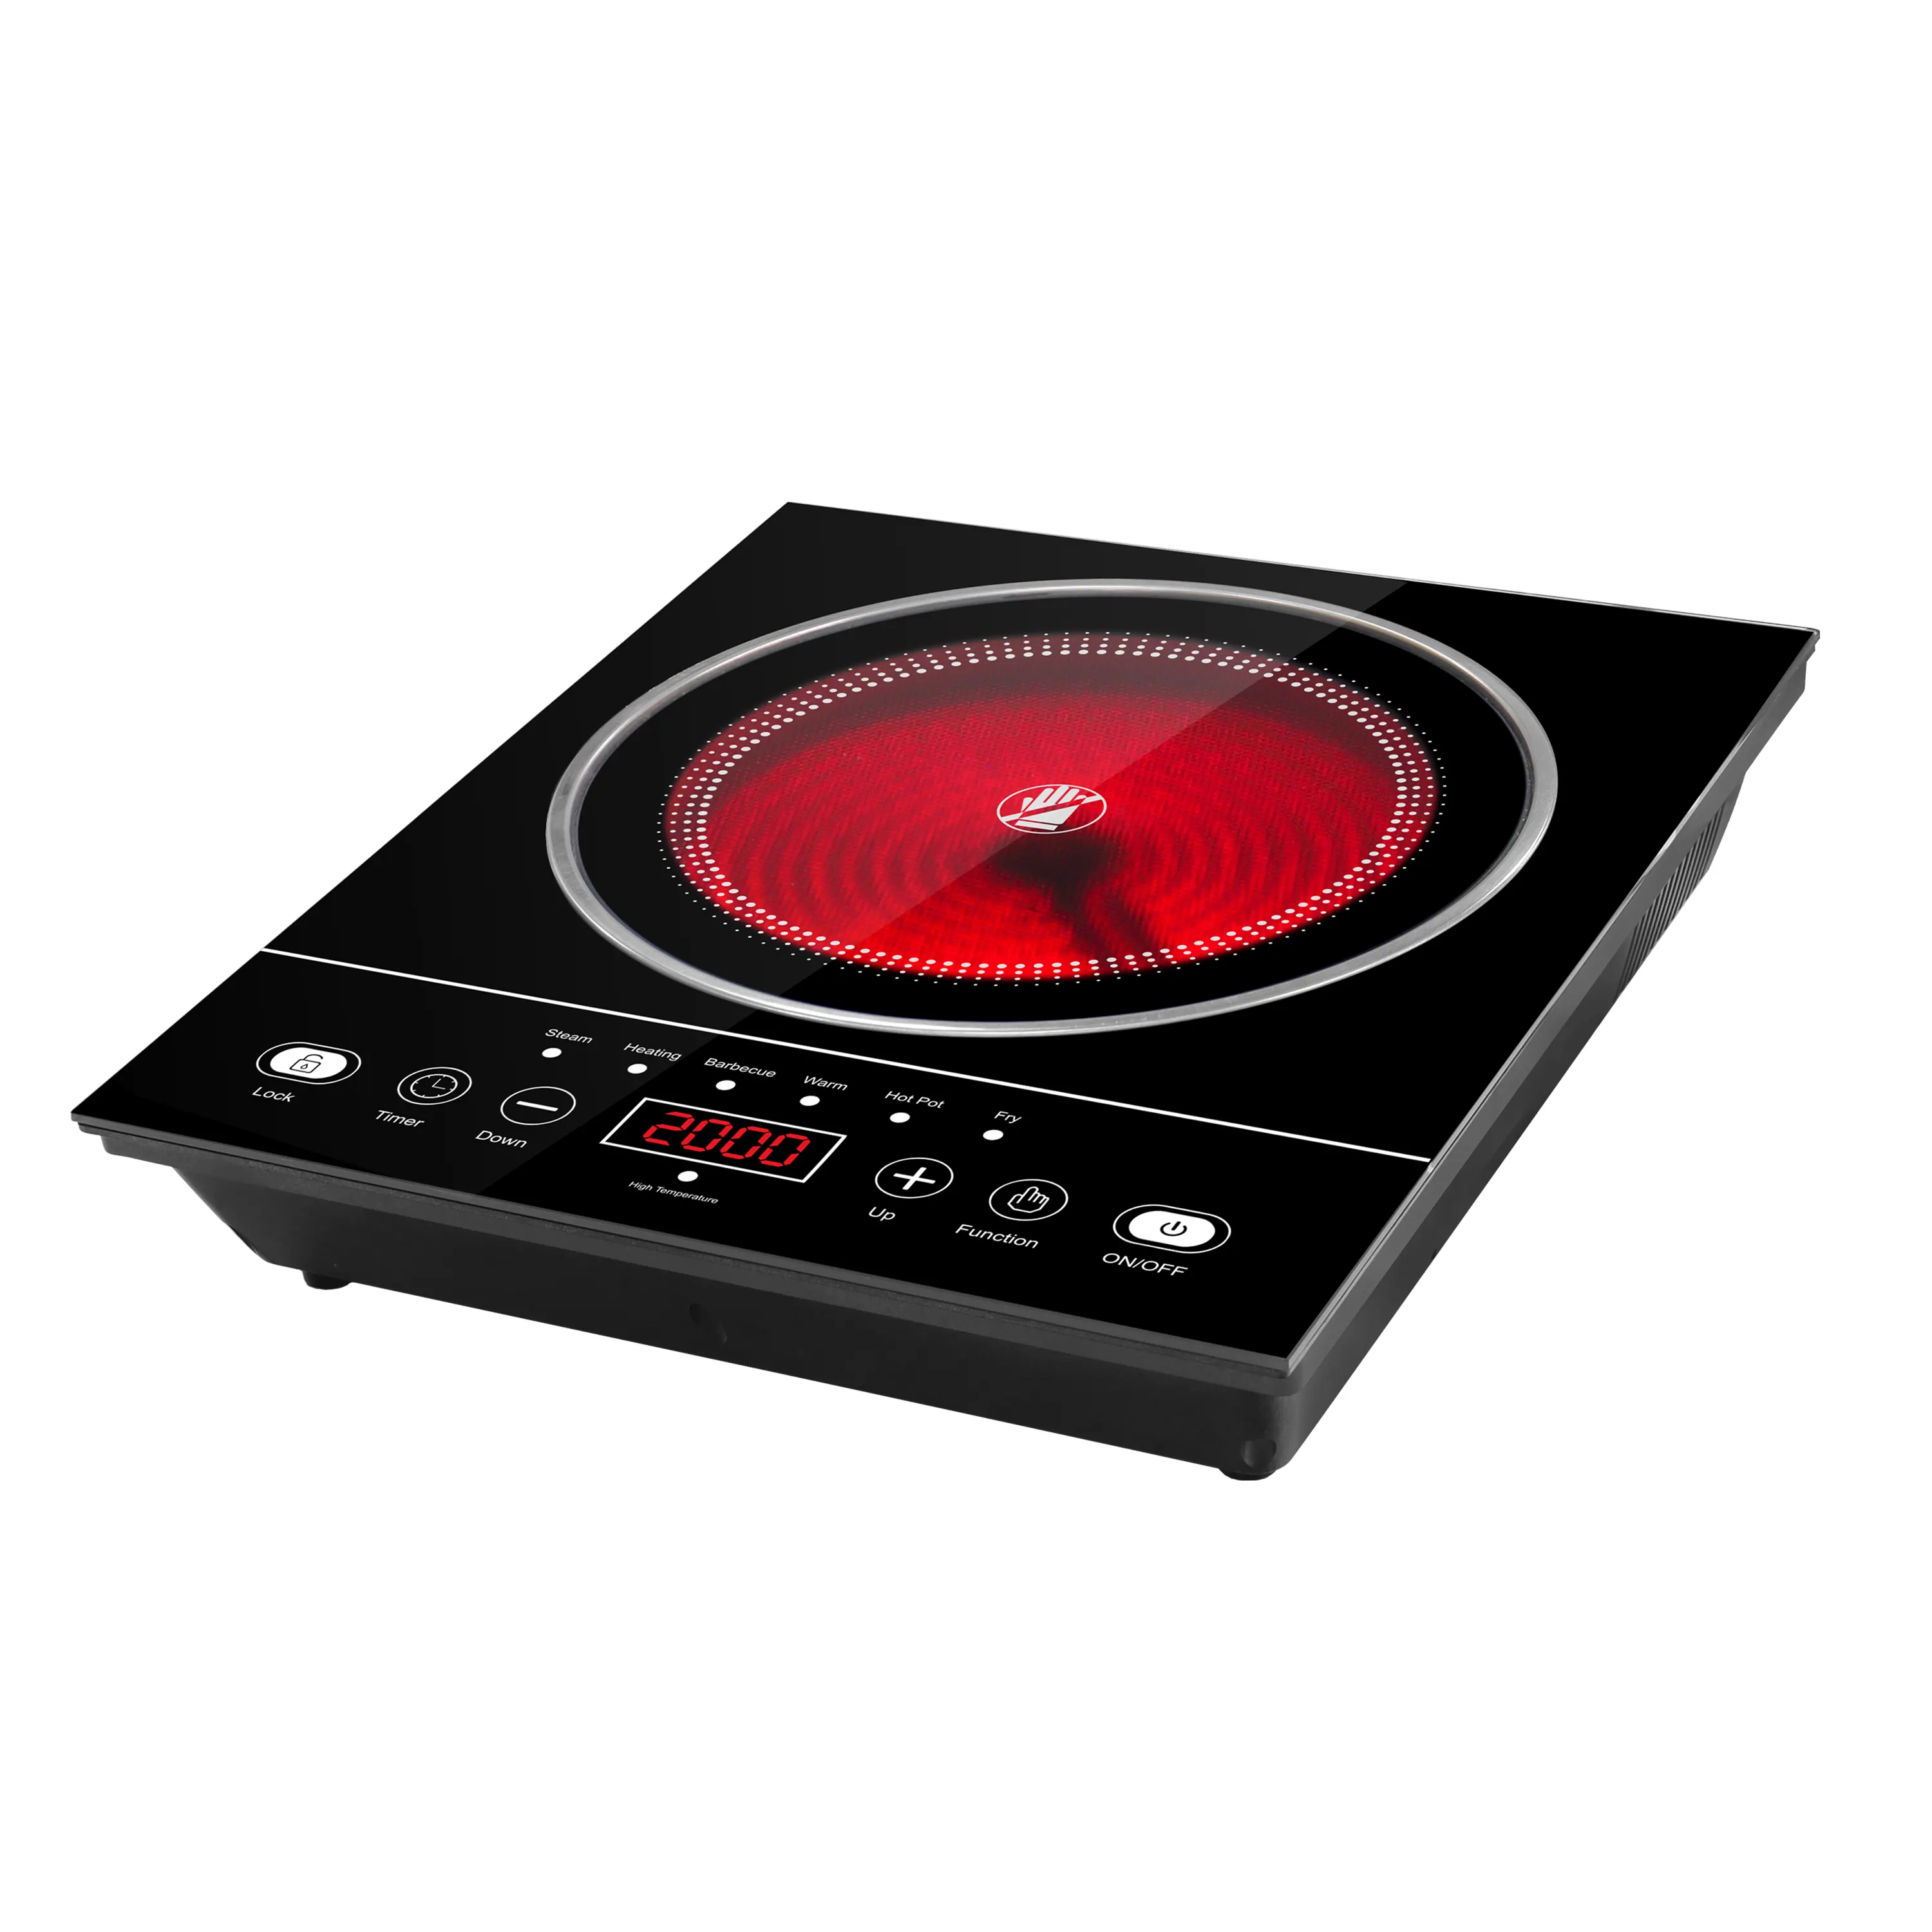 High Power Restaurant Induction Hob Household Kitchen Appliance 1 Burner Ceramic Induction Cooktop Infrared Induction Cooker